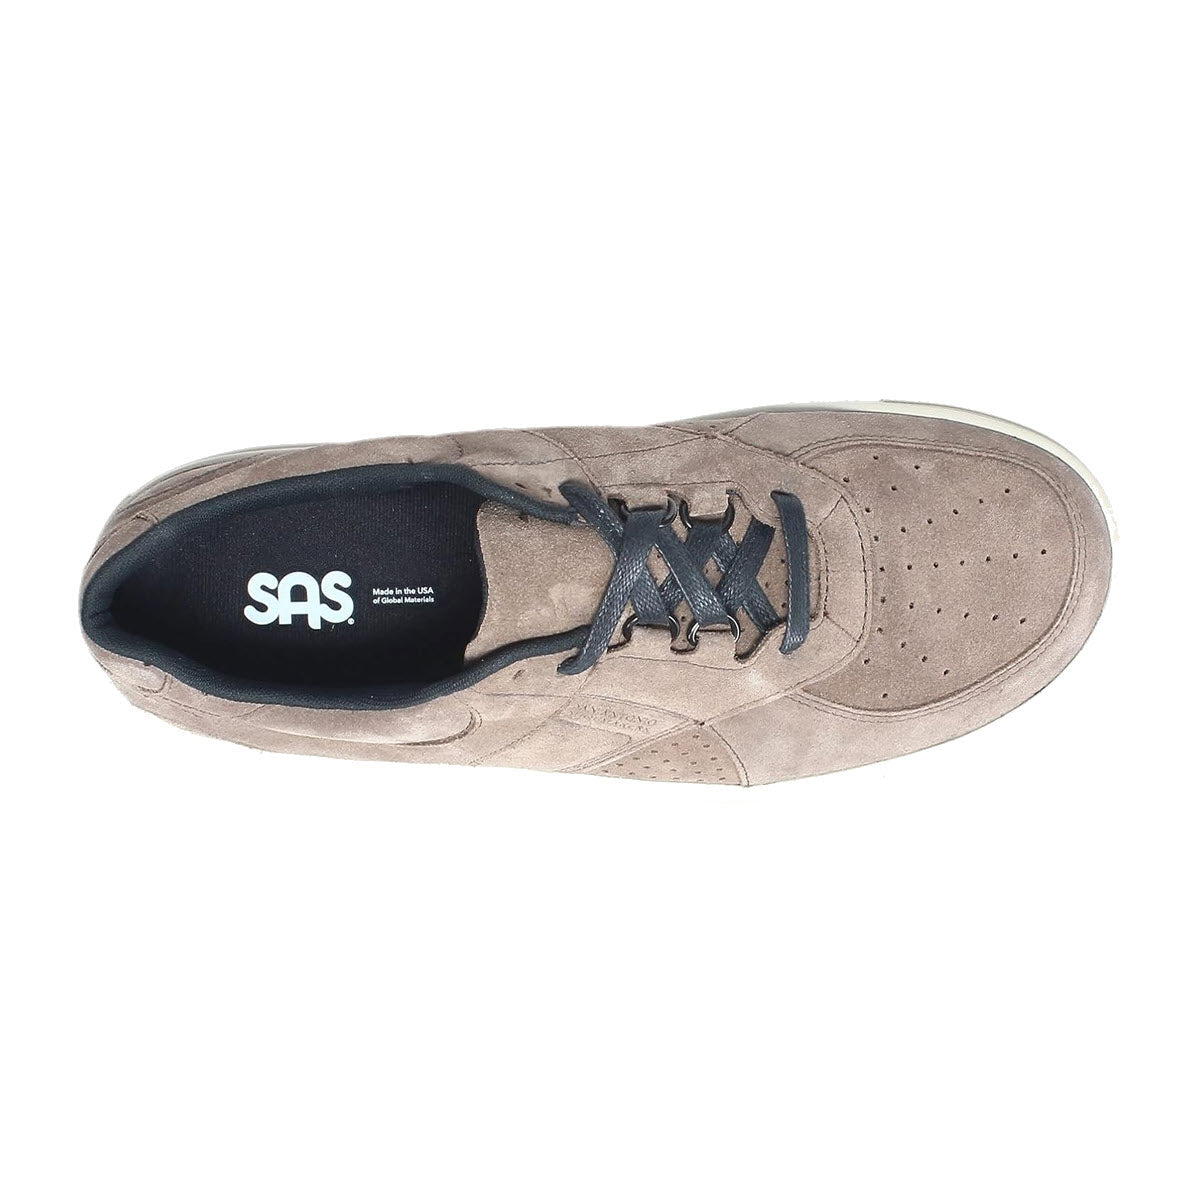 Top view of a single beige perforated leather sneaker with black laces and a logo reading &quot;SAS&quot; on the insole.